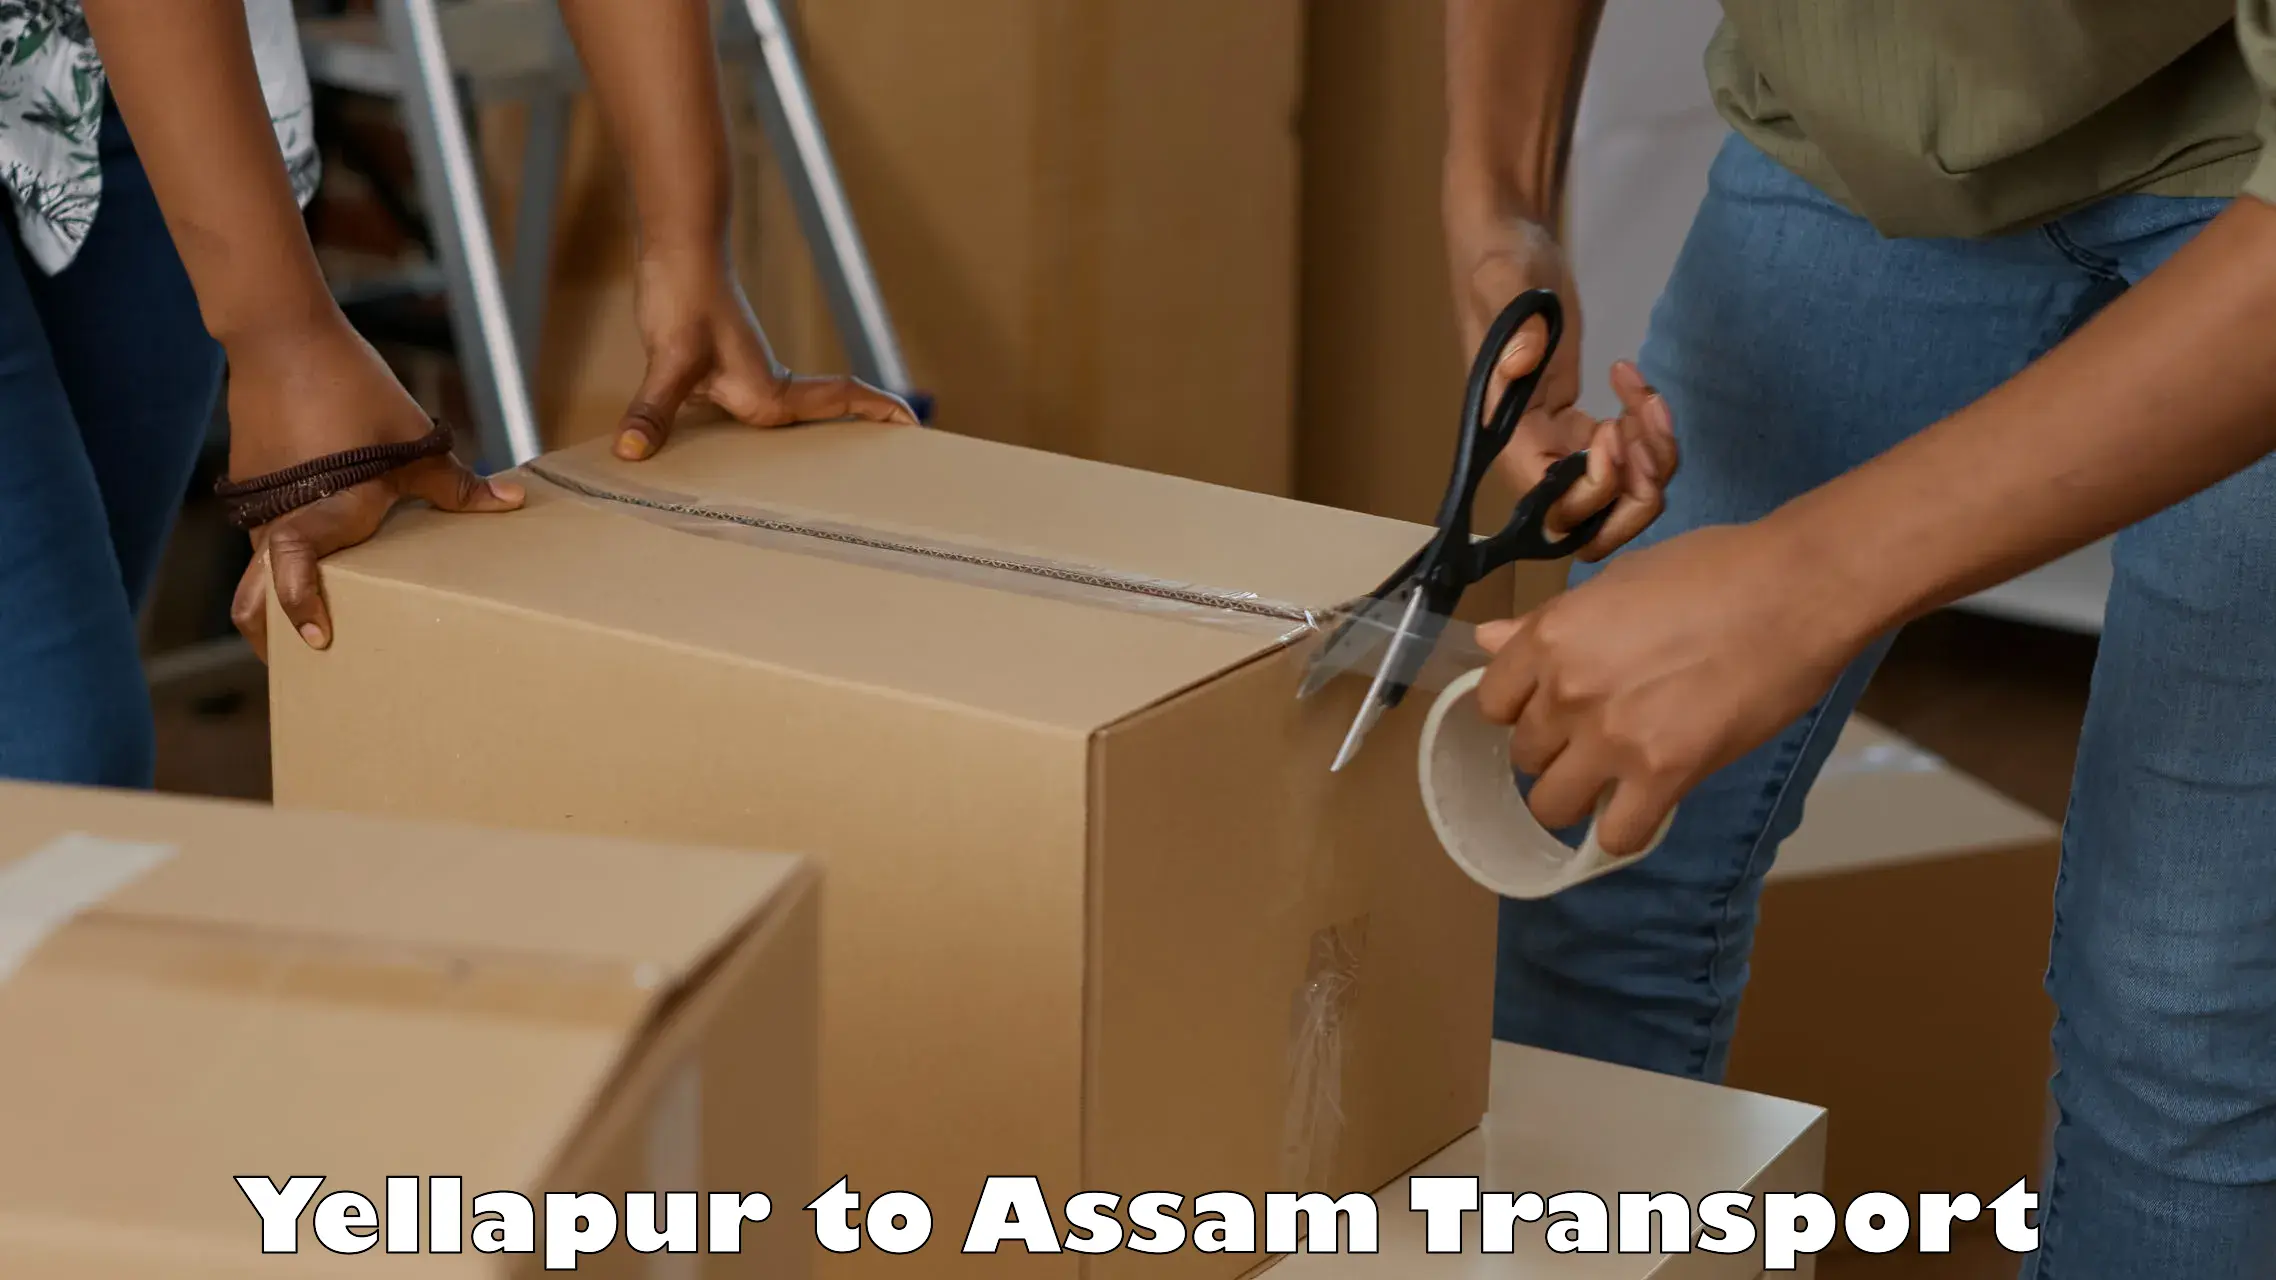 Truck transport companies in India Yellapur to Chaparmukh